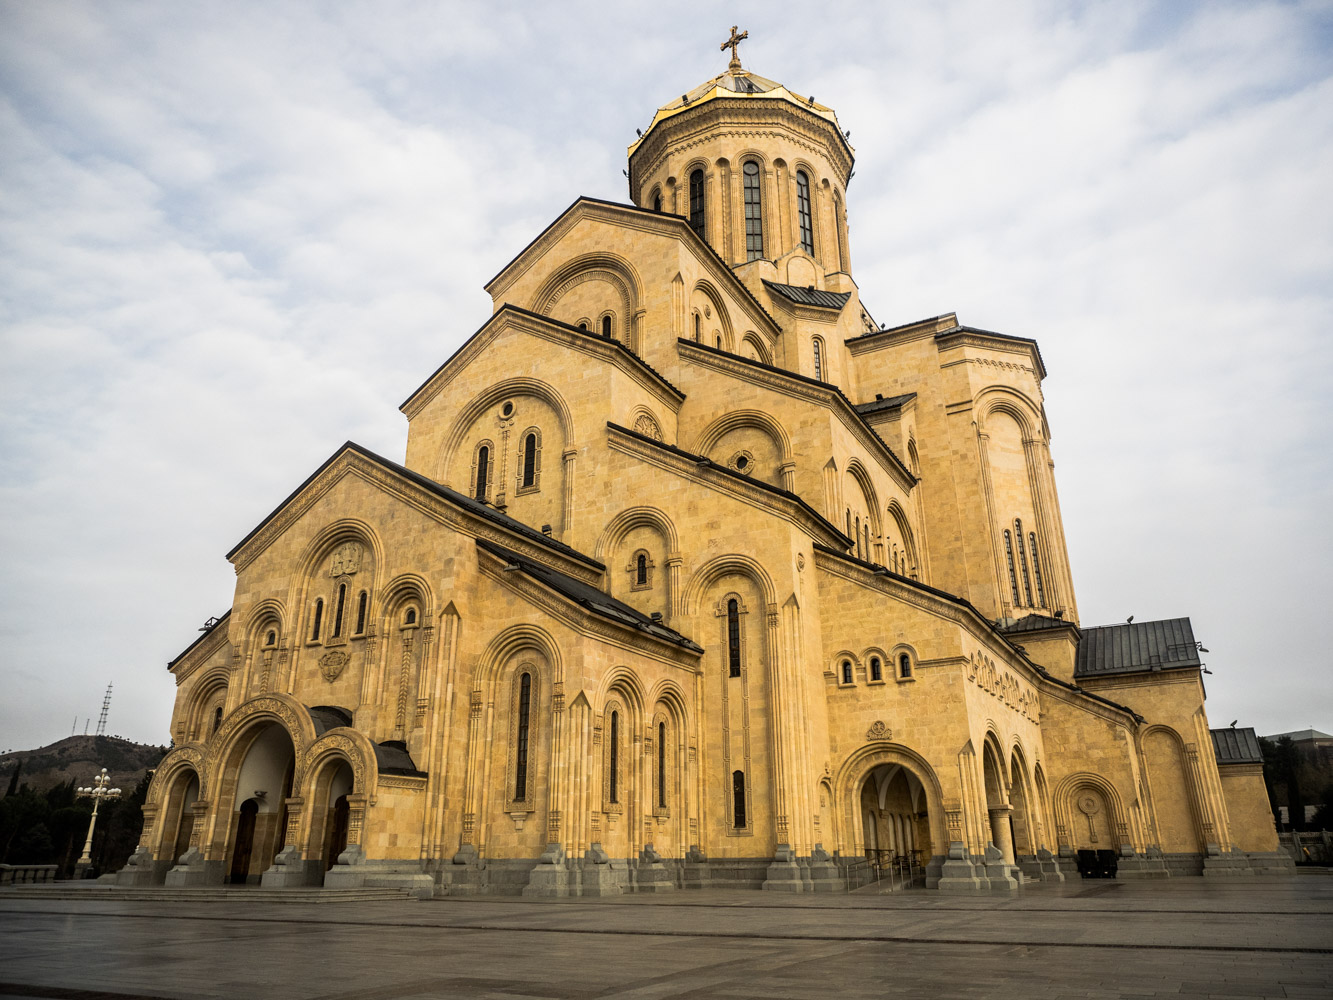 10 places to visit in tbilisi